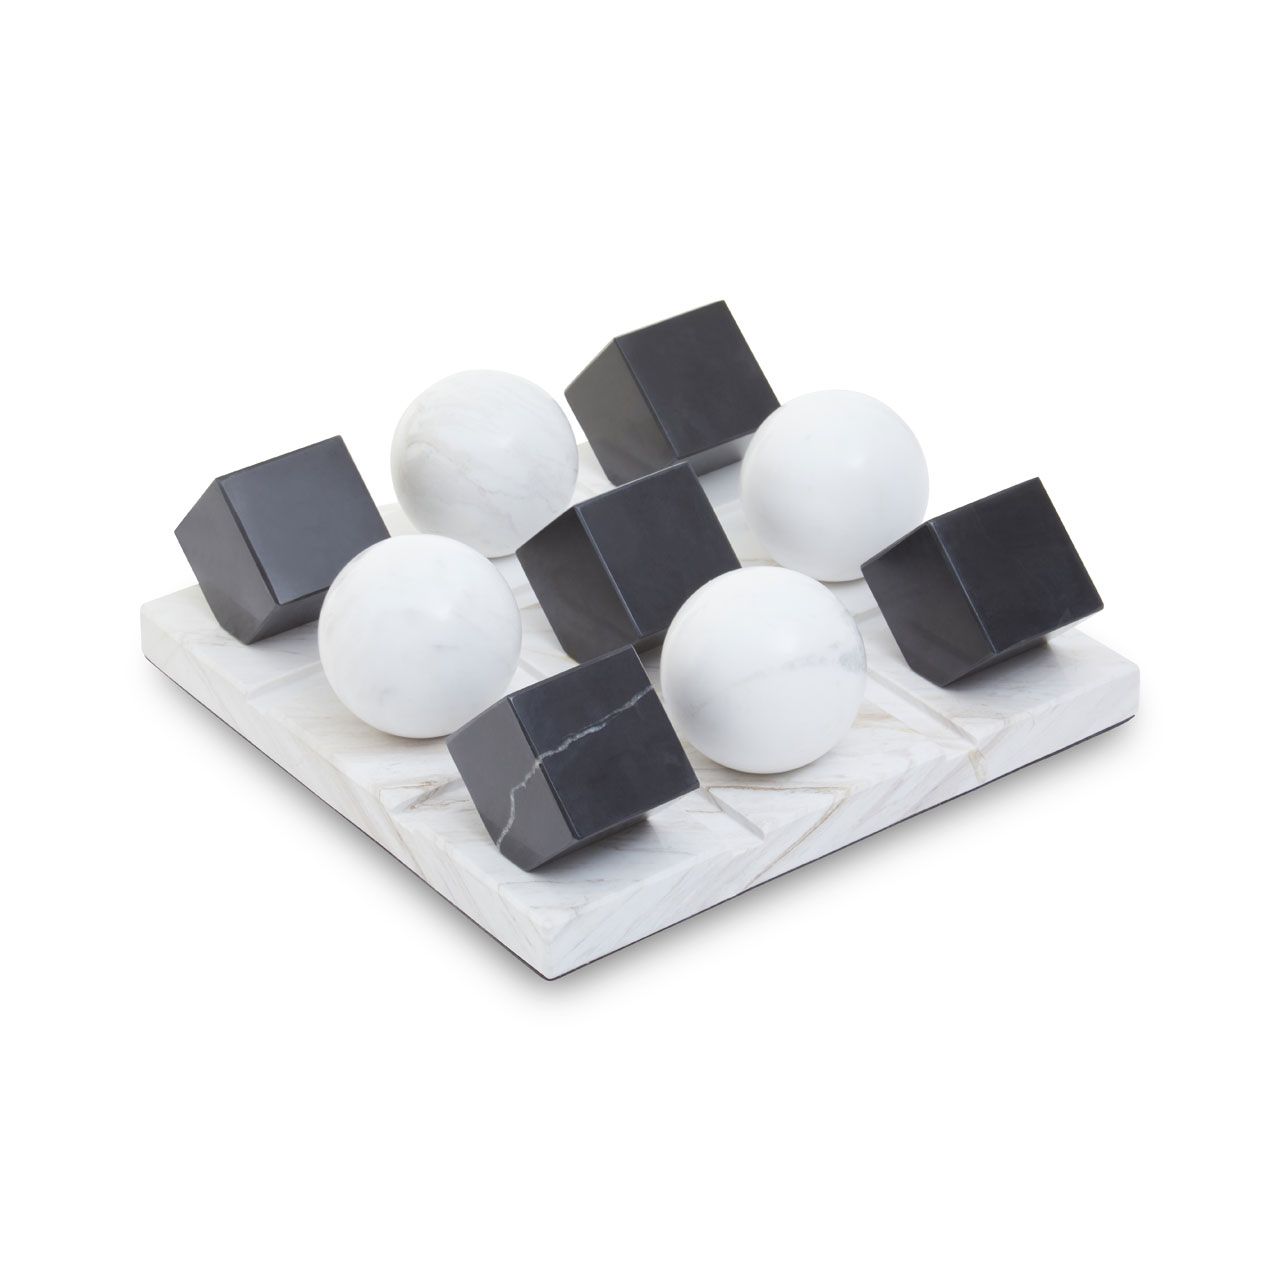 Victoria & Co. Black and White Marble Tic Tac Toe